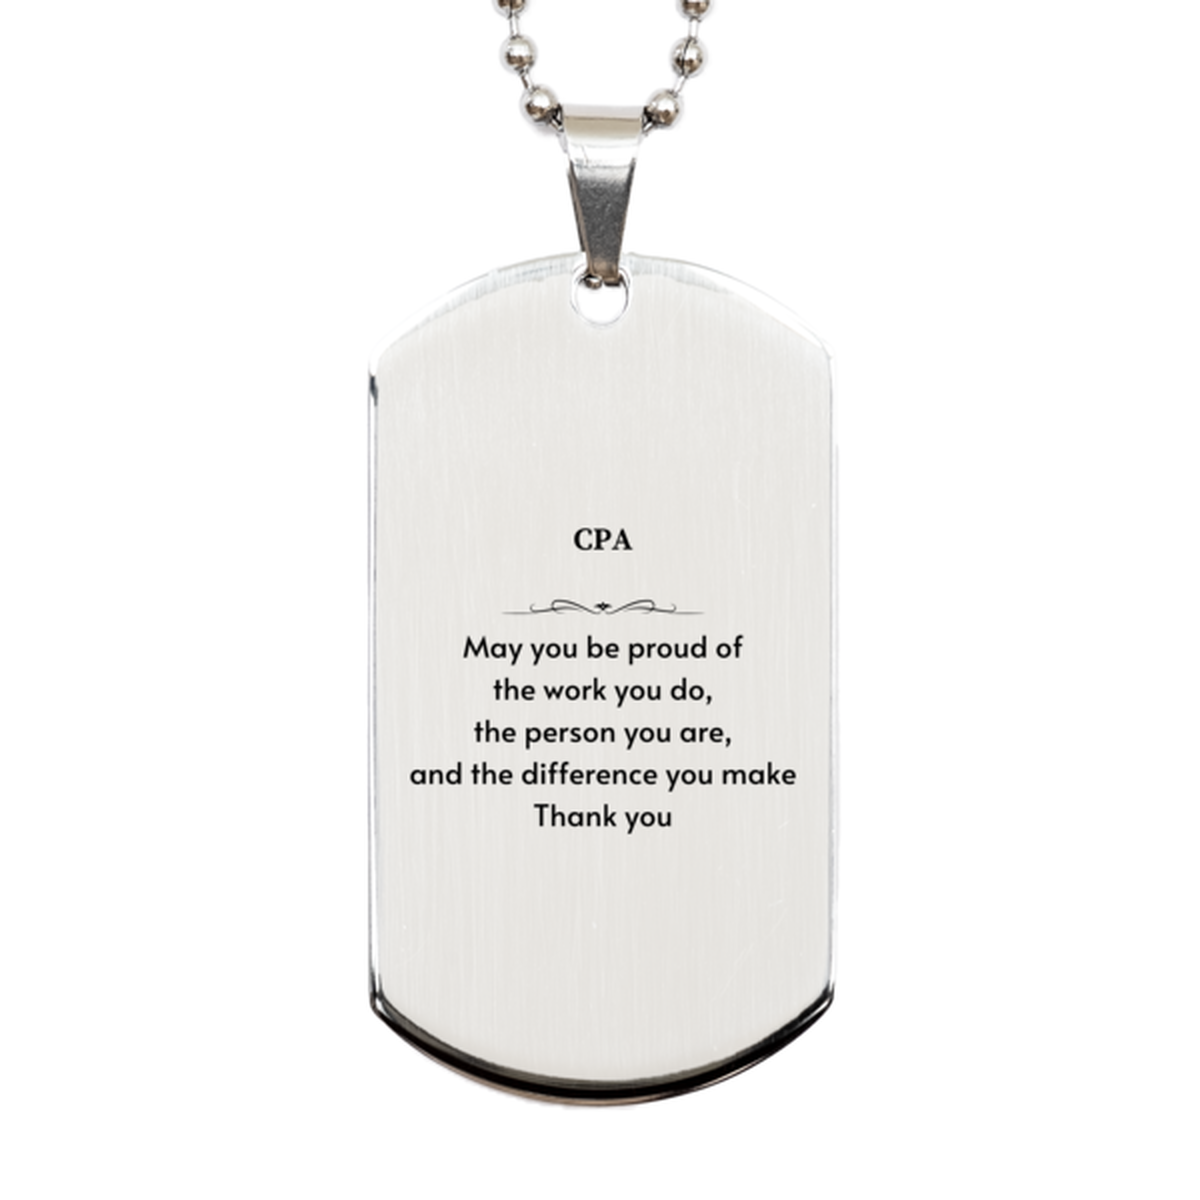 Heartwarming Silver Dog Tag Retirement Coworkers Gifts for CPA, CPA May You be proud of the work you do, the person you are Gifts for Boss Men Women Friends